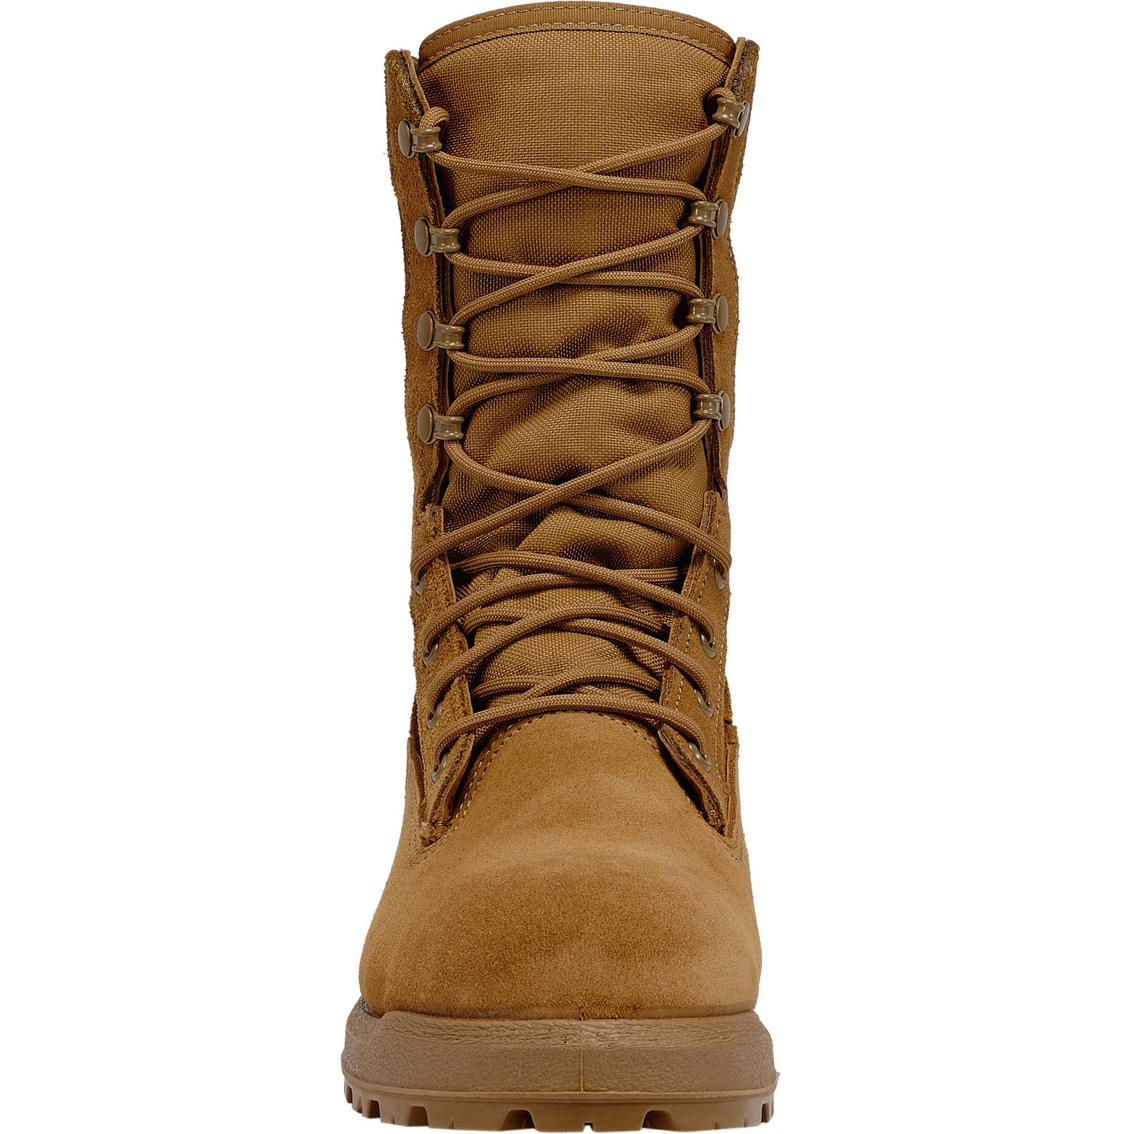 Belleville Ultralight Marine Corps Certified Hot Weather Boots - Image 6 of 7